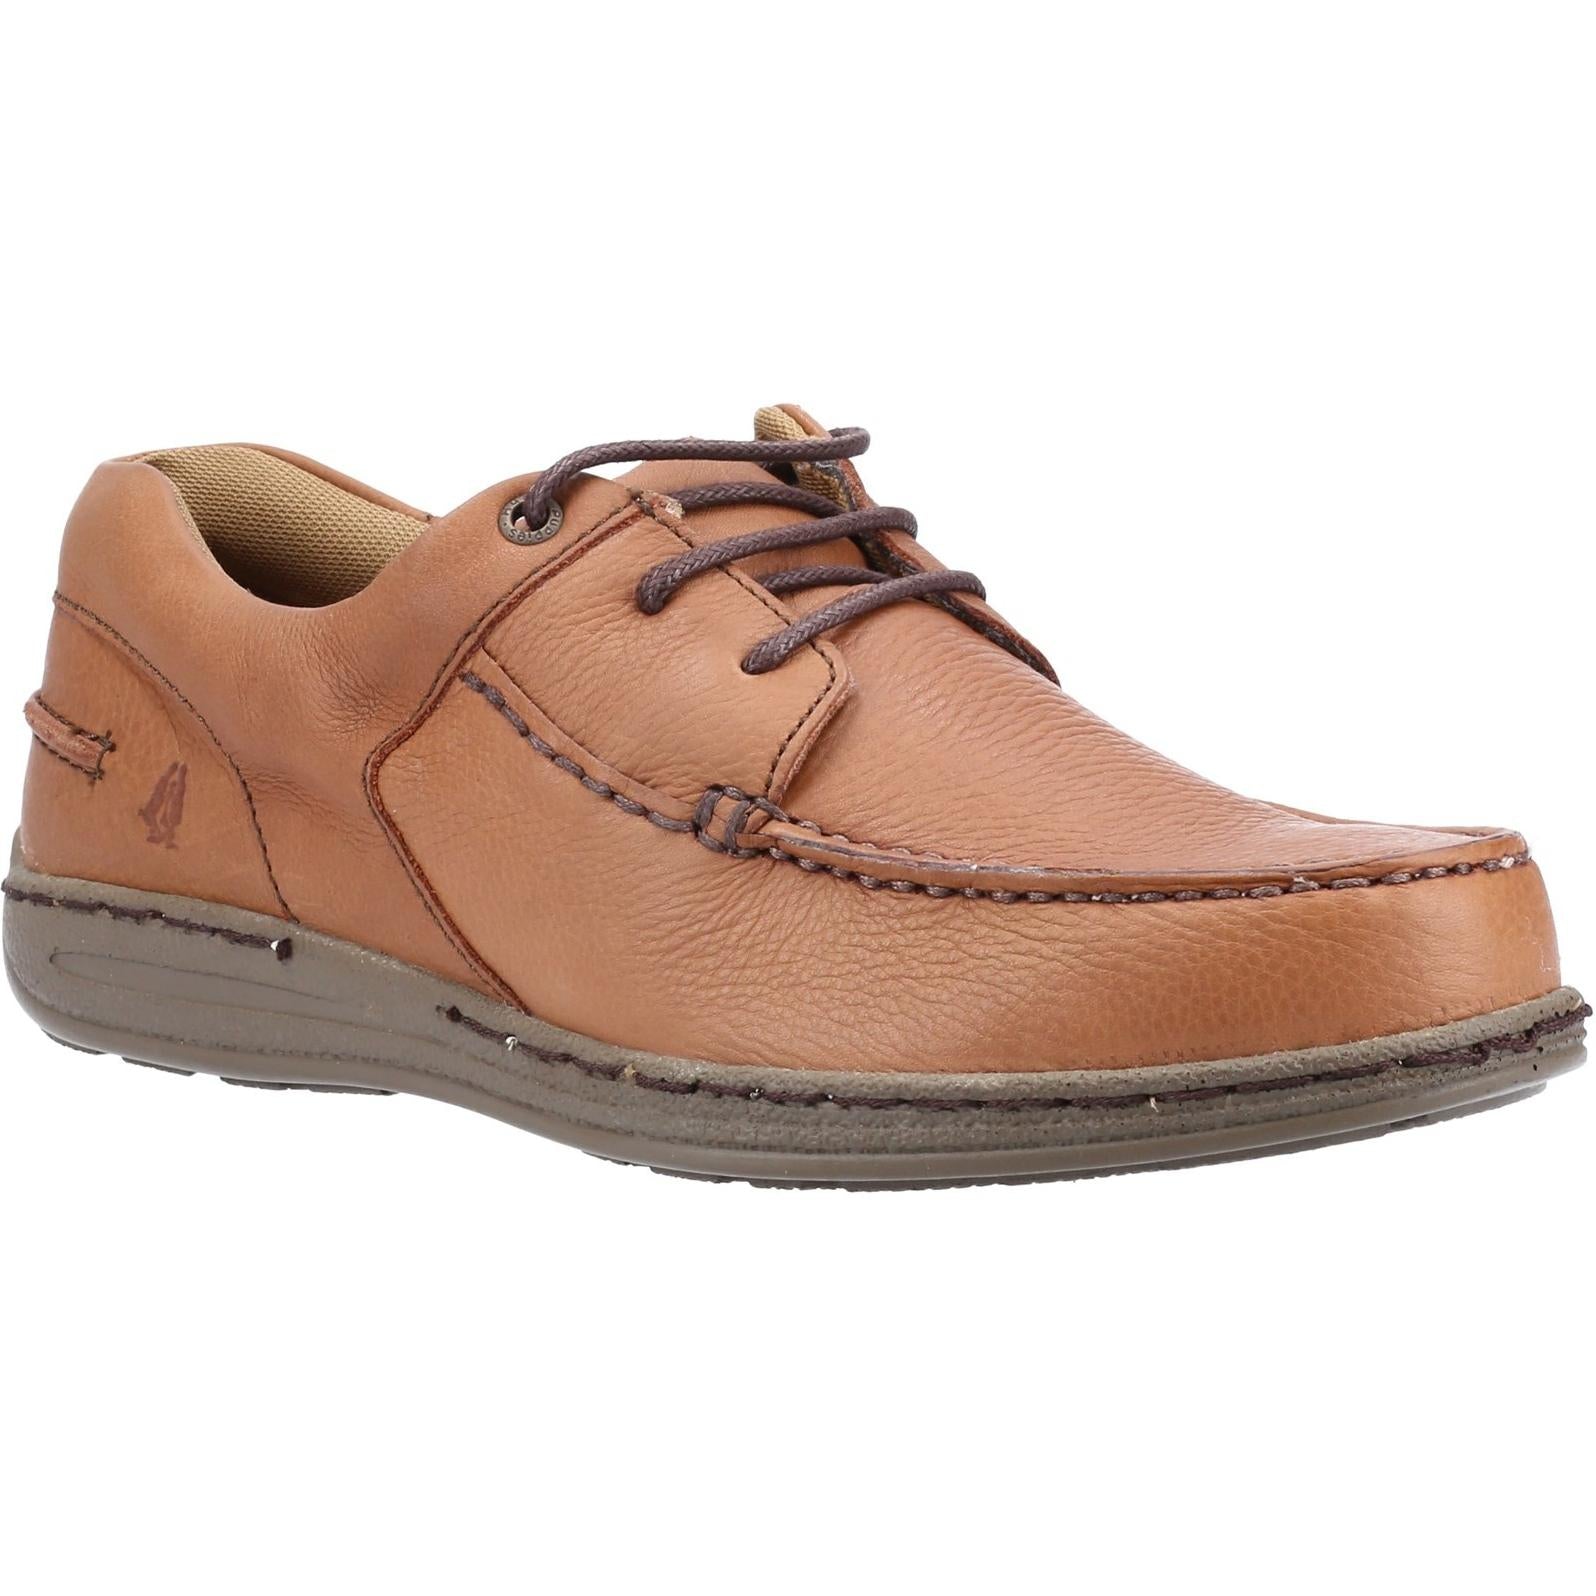 Hush Puppies Winston Victory Causal Lace Up Moccasin Shoe